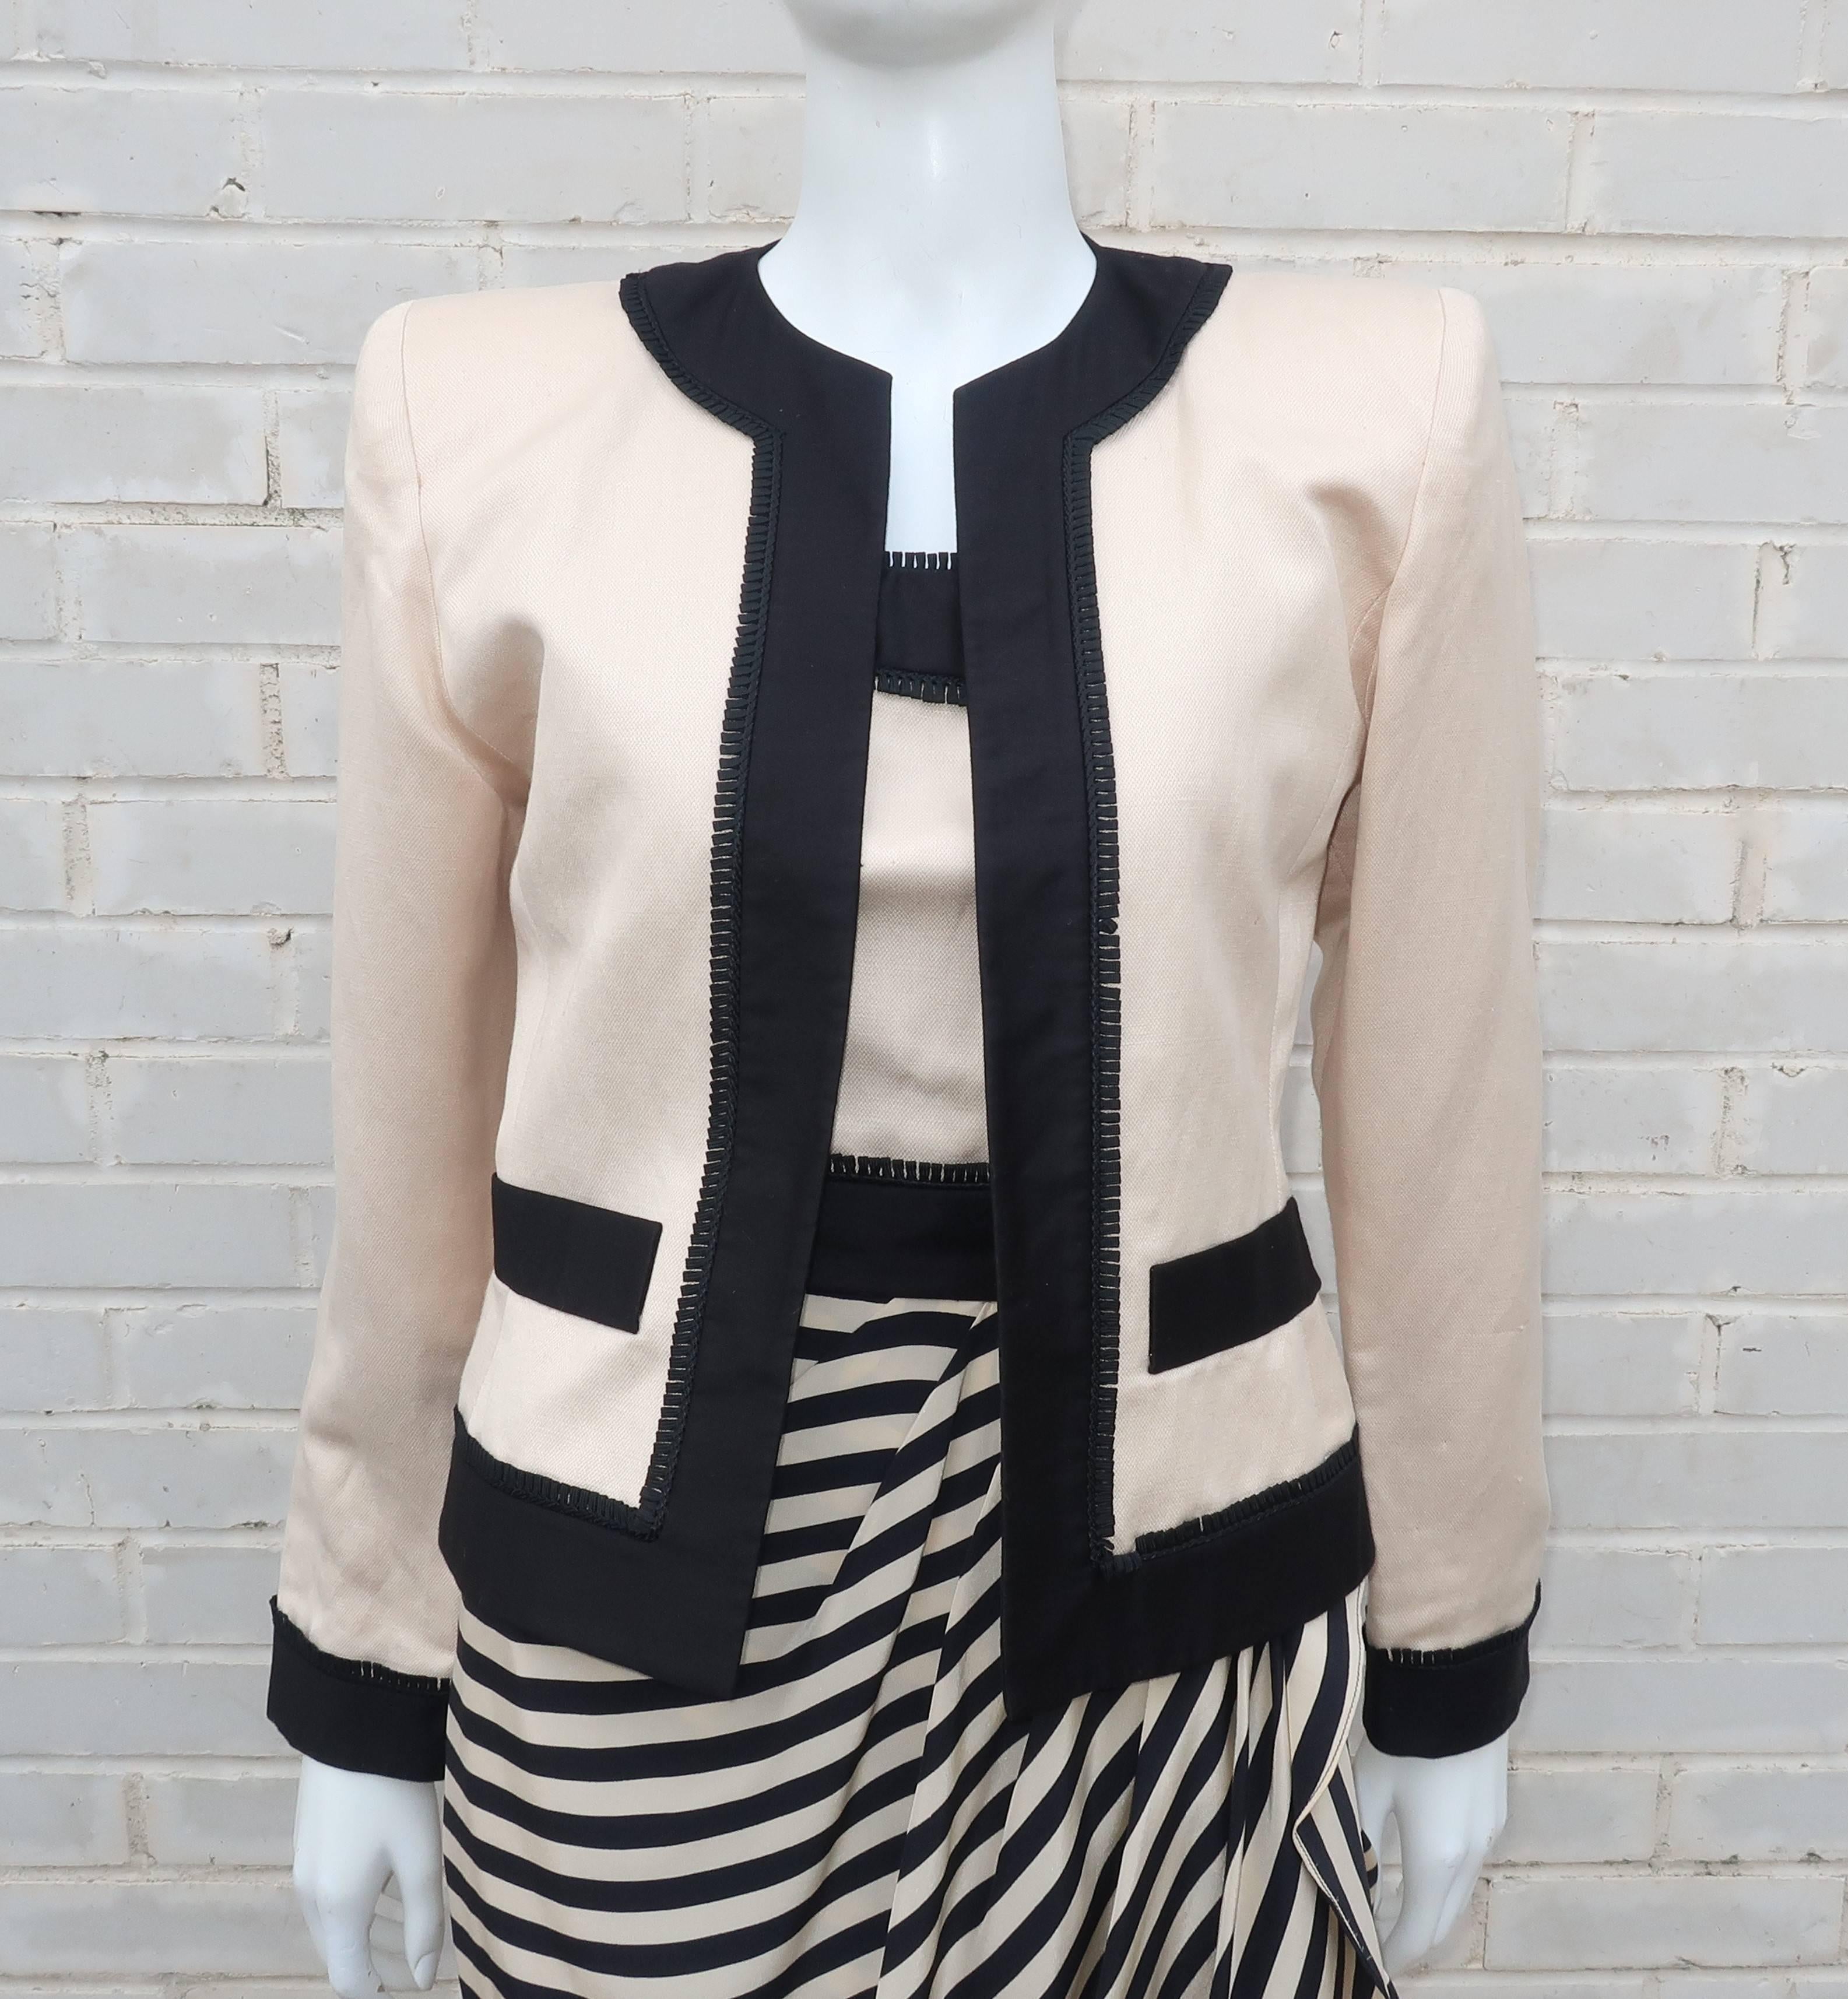 Elegance with a stylish combination of black and ivory graphics are the hallmarks of this 1980's Liancarlo dress and jacket ensemble.  The strapless dress has a polished cotton and linen bodice with a striped silk sarong style skirt.  It zips and